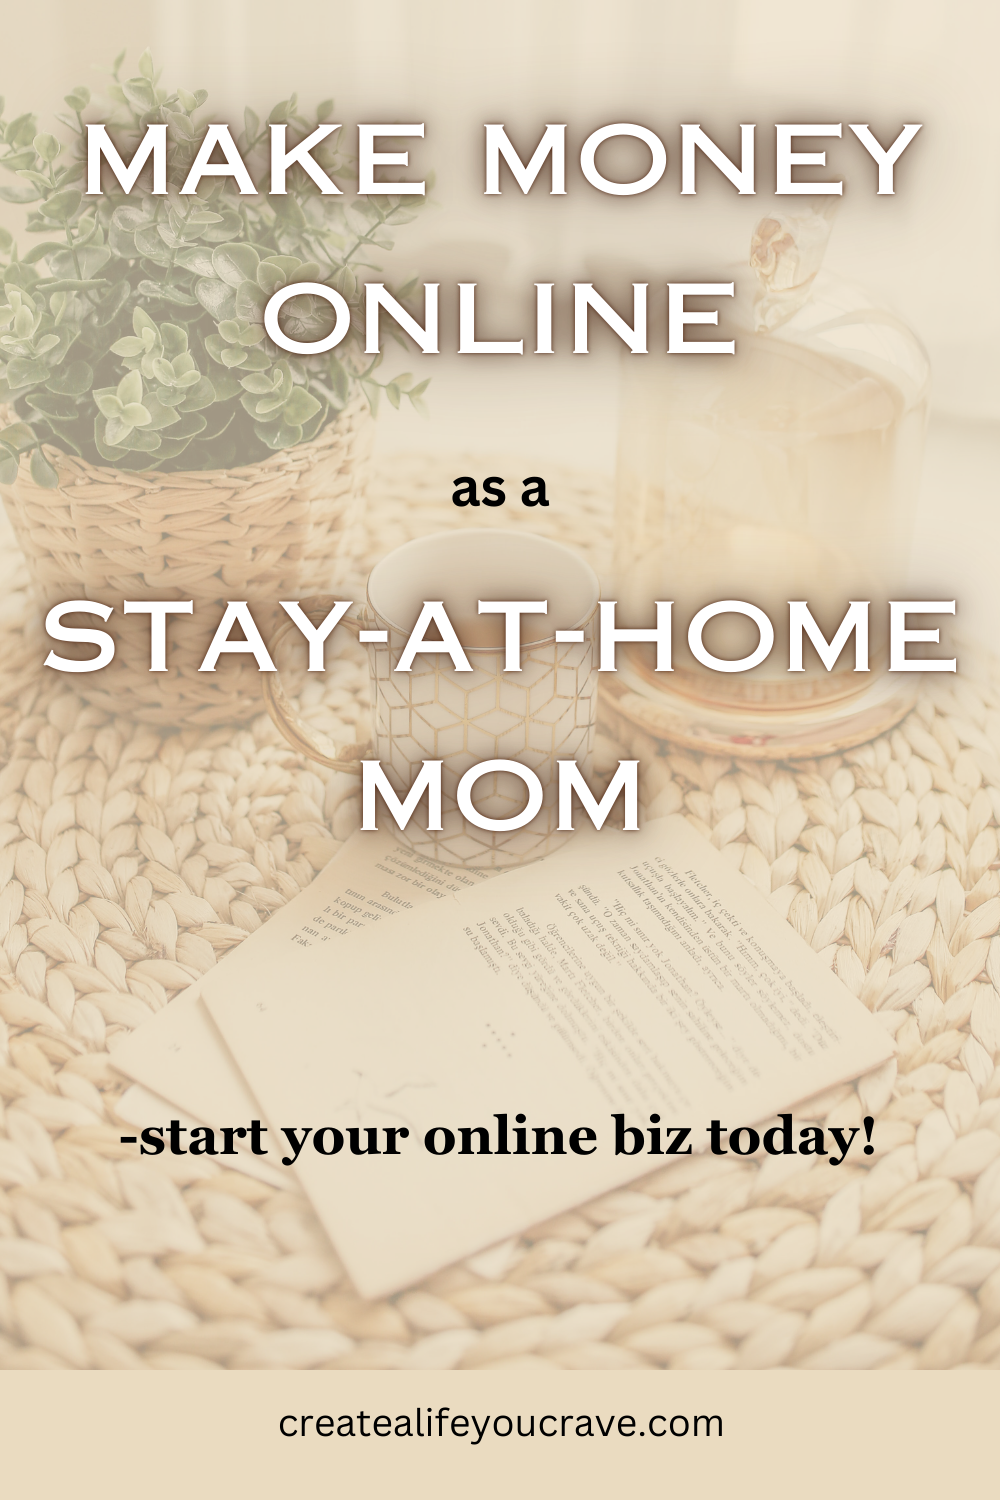 The BEST way to make money online as a stay-at-home mom